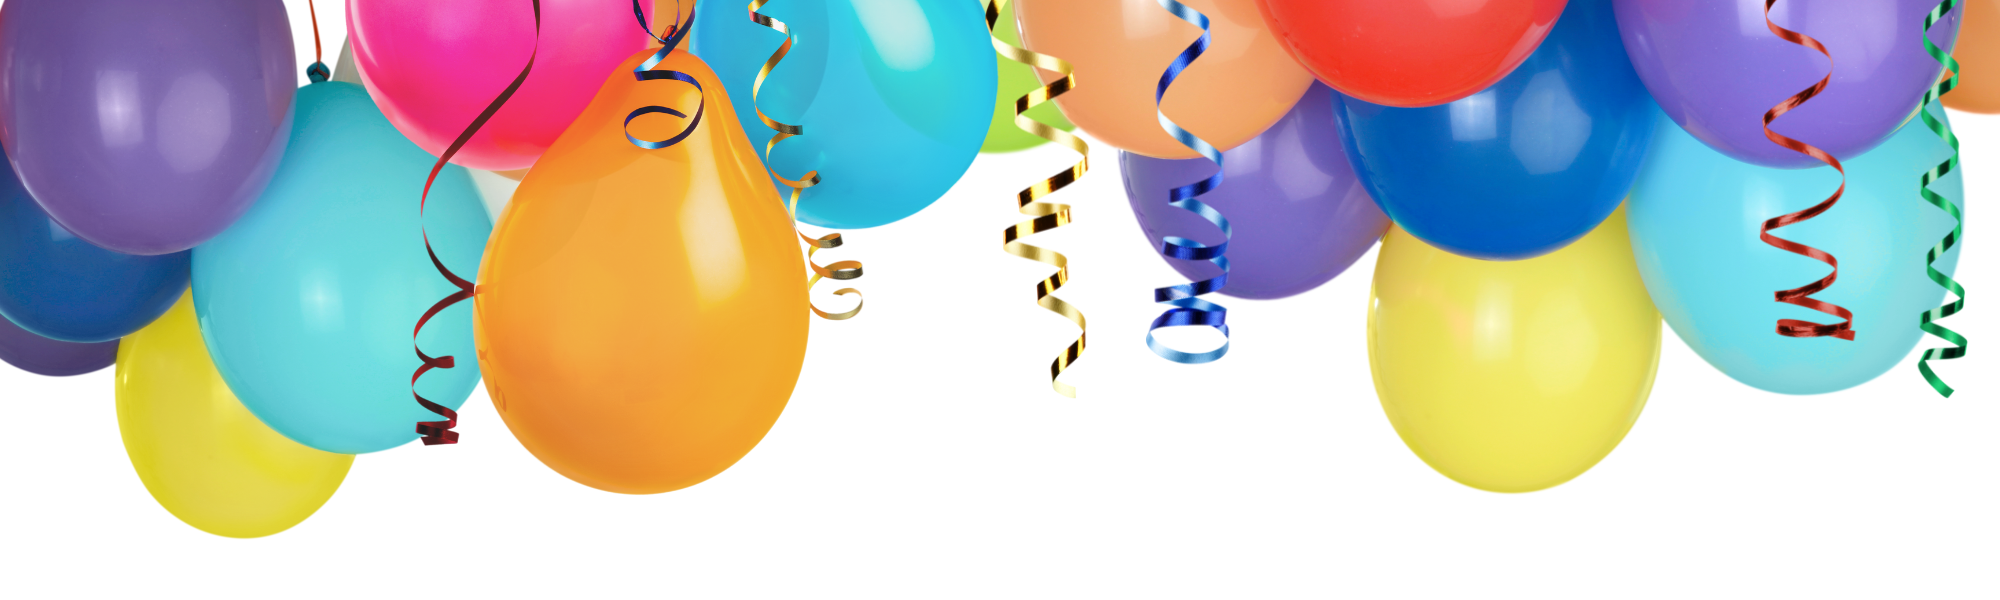 colorful balloons with streamers